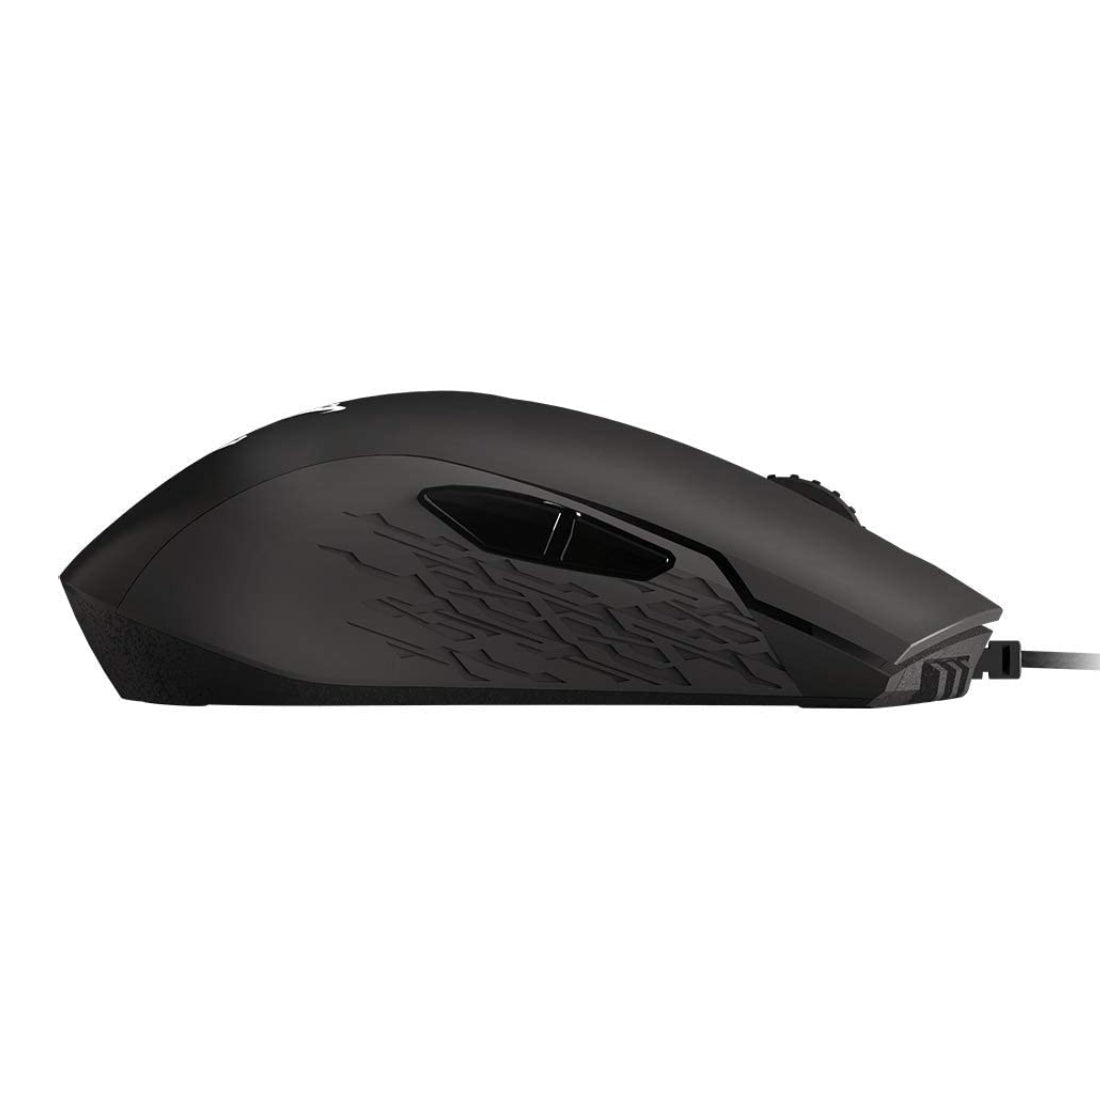 Gigabyte Aorus M4 Wired Gaming Mouse - Matte Black - Store 974 | ستور ٩٧٤